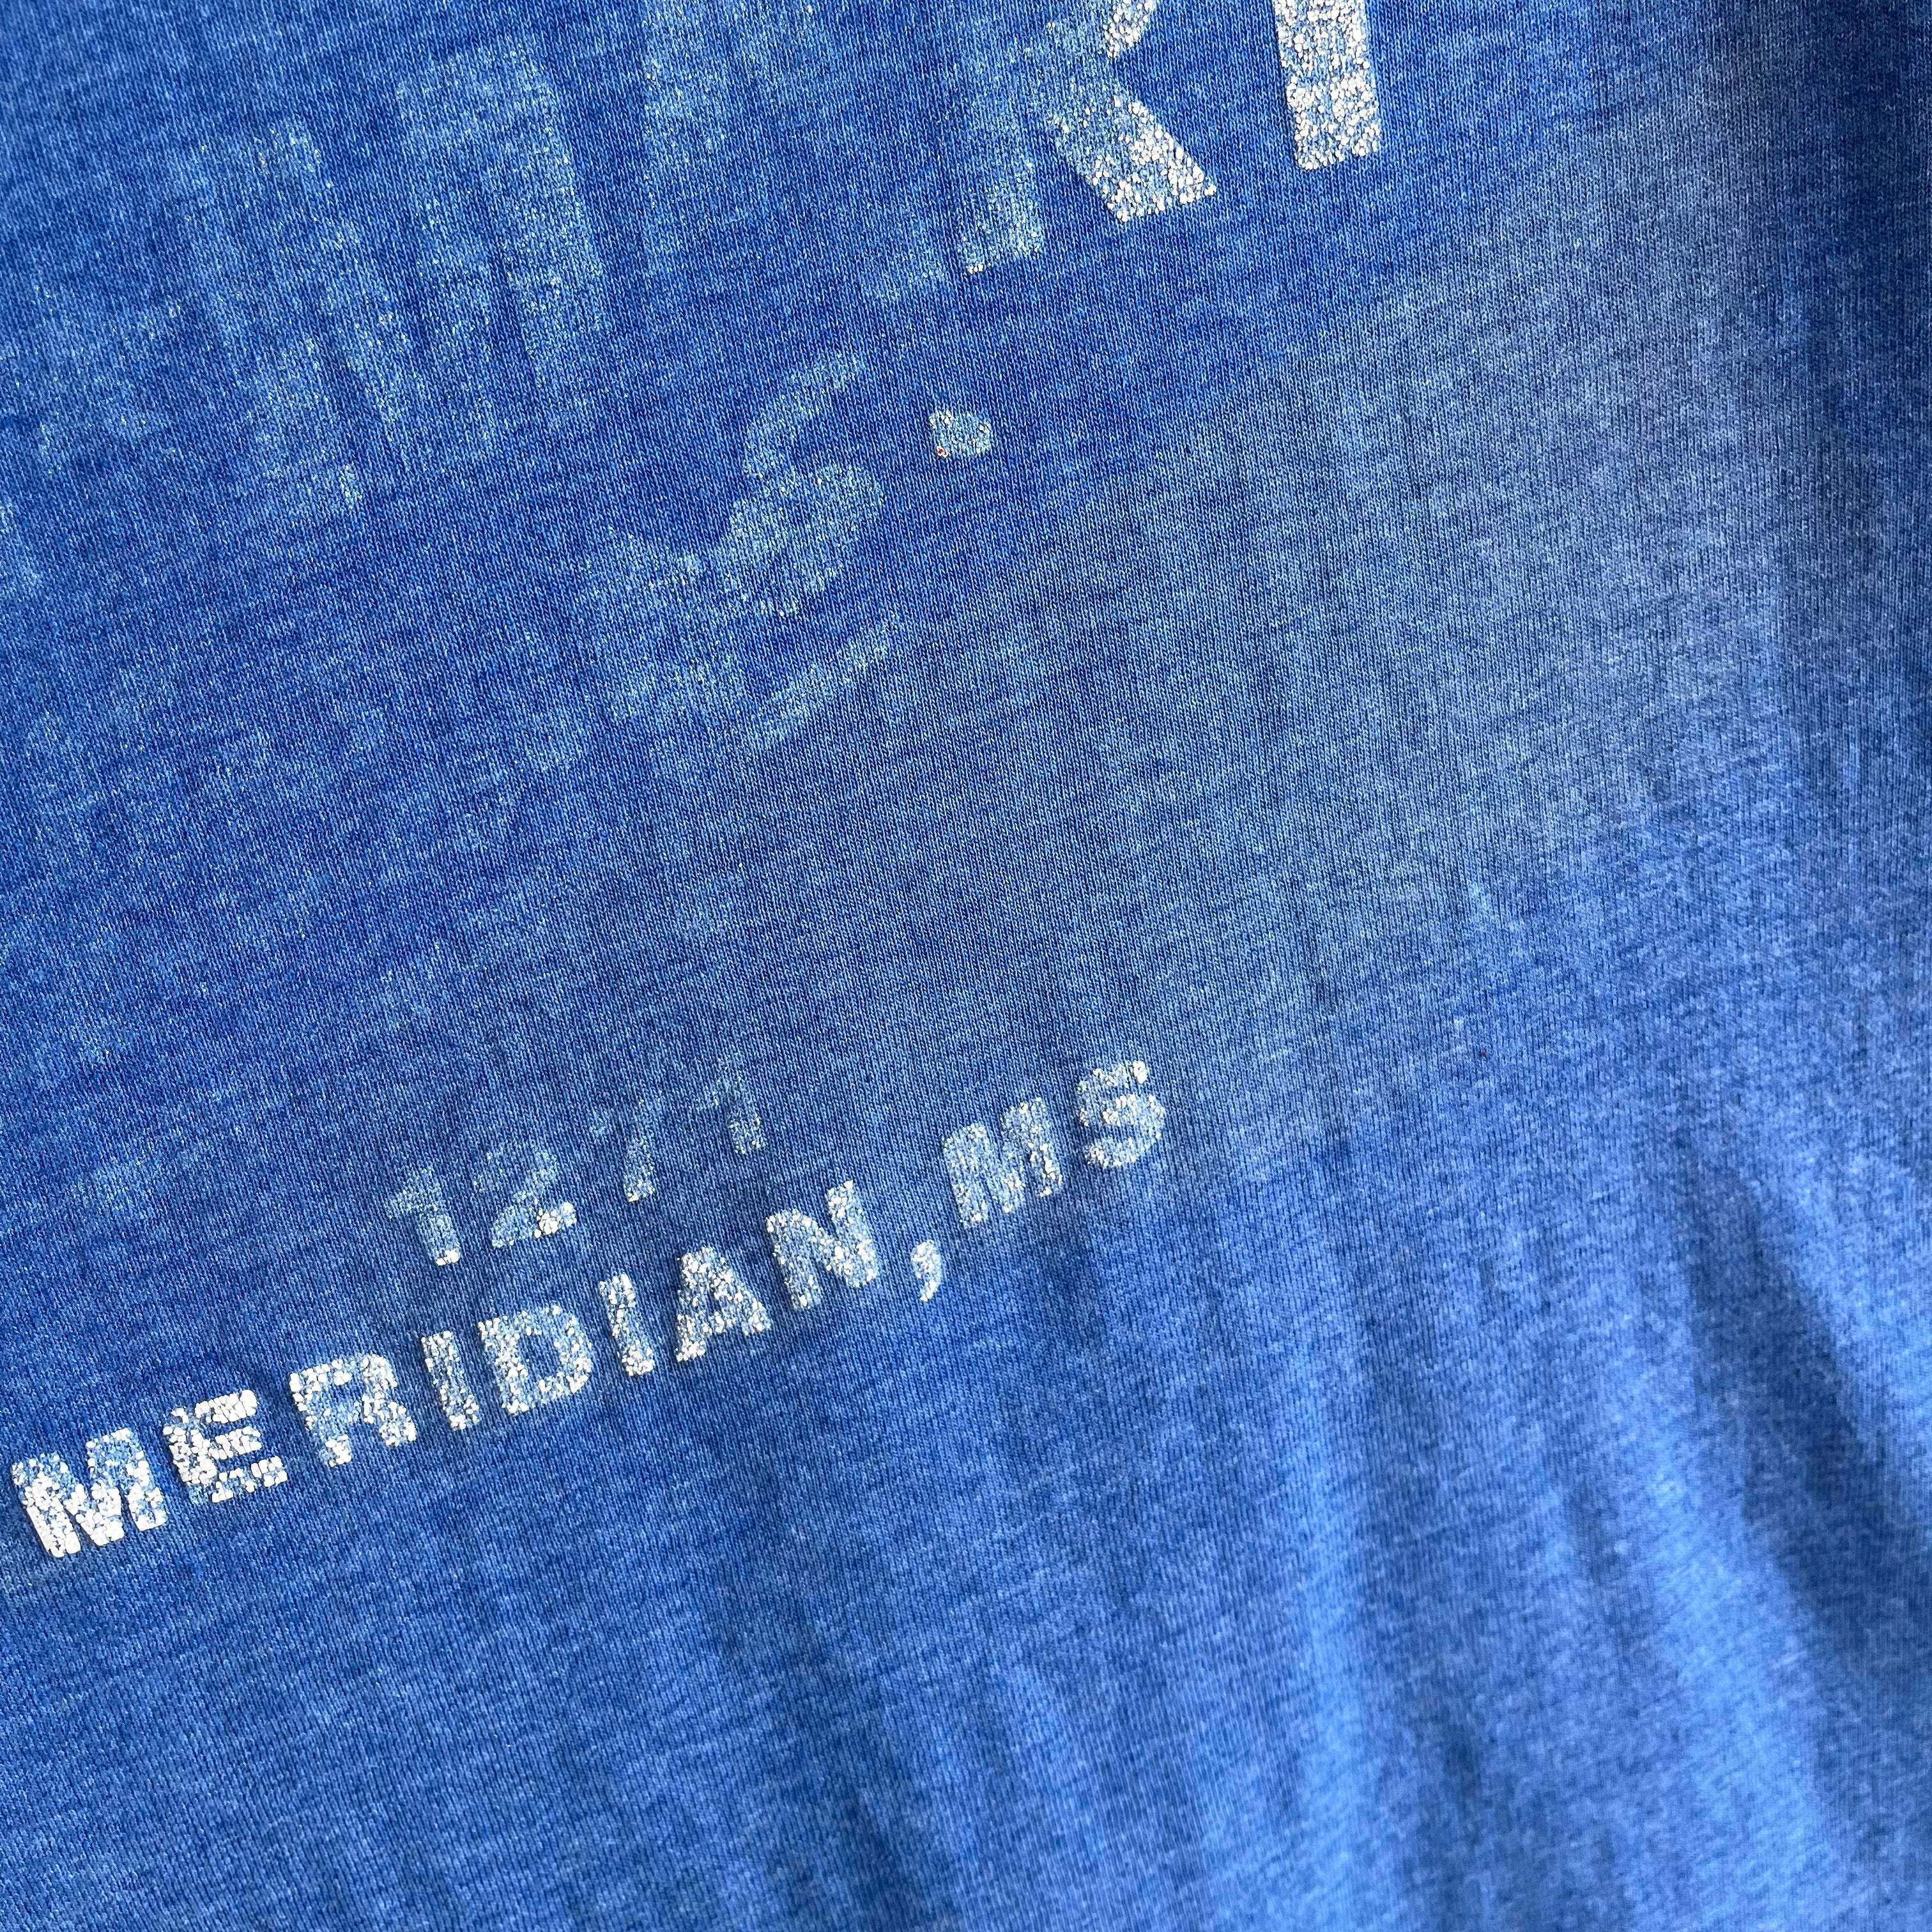 1980s Mississippi Wal-Mart Always Sun Faded T-Shirt